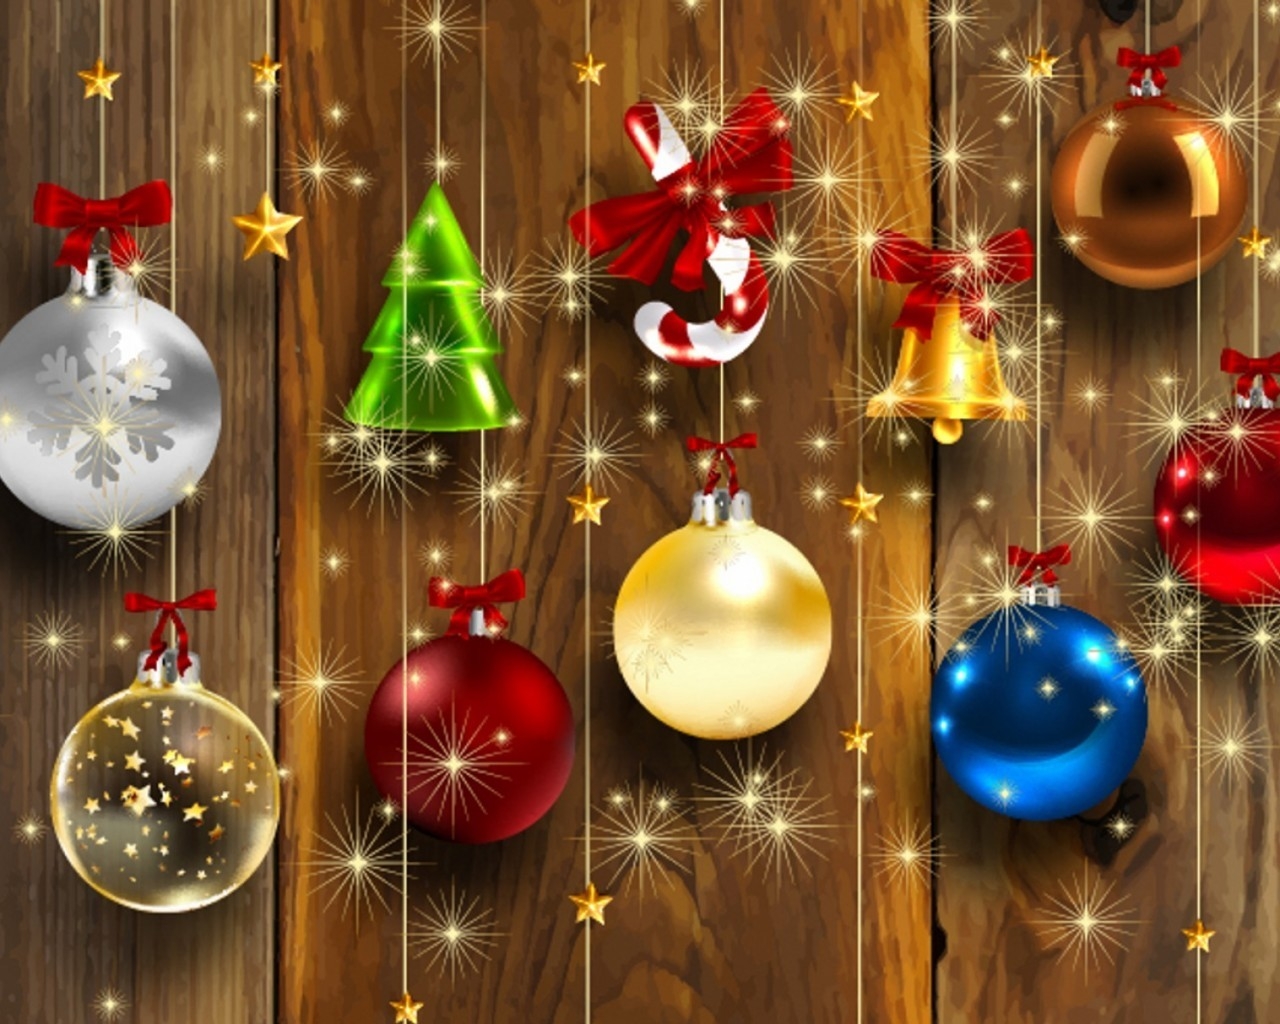 2013 Christmas Ornaments for 1280 x 1024 resolution